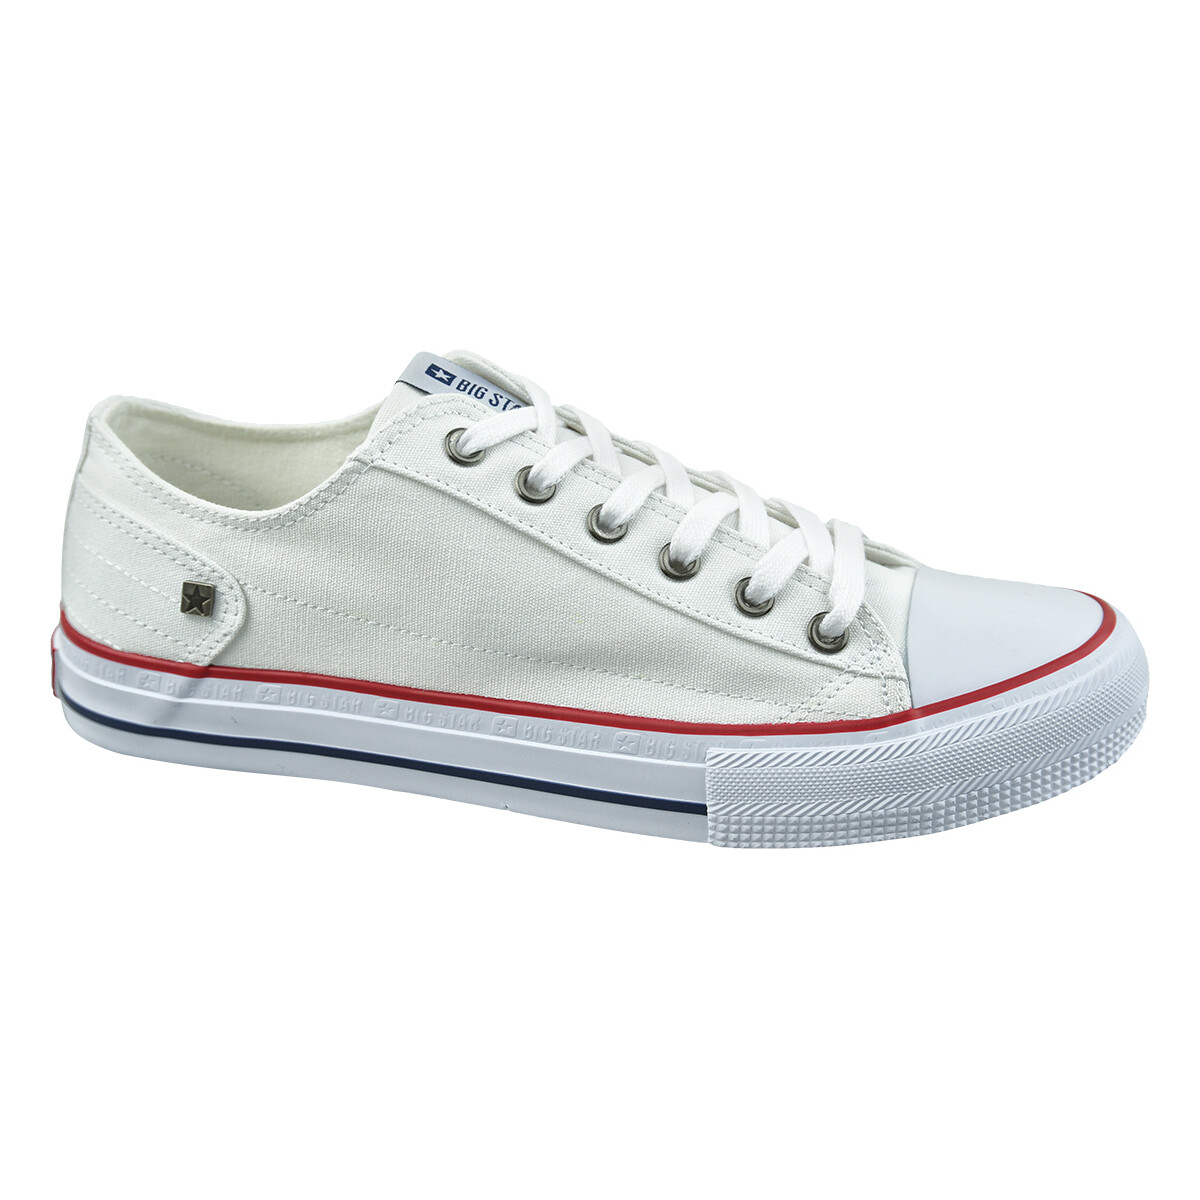 Chaussures Femme Baskets basses Big Star Shoes Blanc